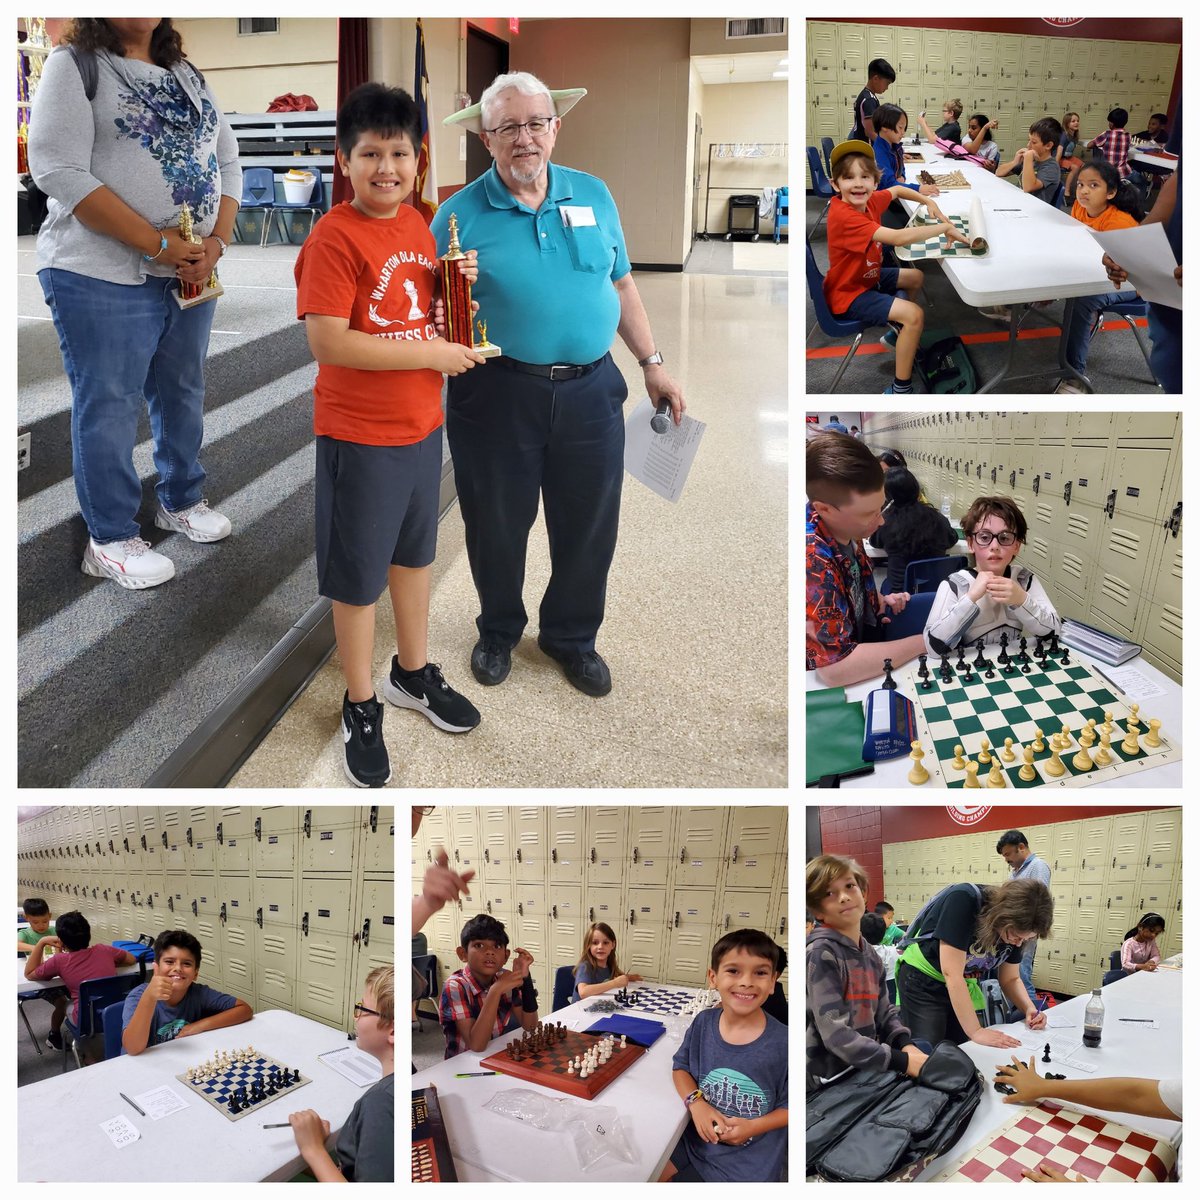 Yesterday's May the Fourth be with you Chess Tournament was epic! The Force was definitely with us as we clinched the championship in the elementary category, bringing home 7 individual trophies. 🏆 #MayTheFourth @HISDLibraryServ @BrettGallini @HISDCentral @WhartonDual